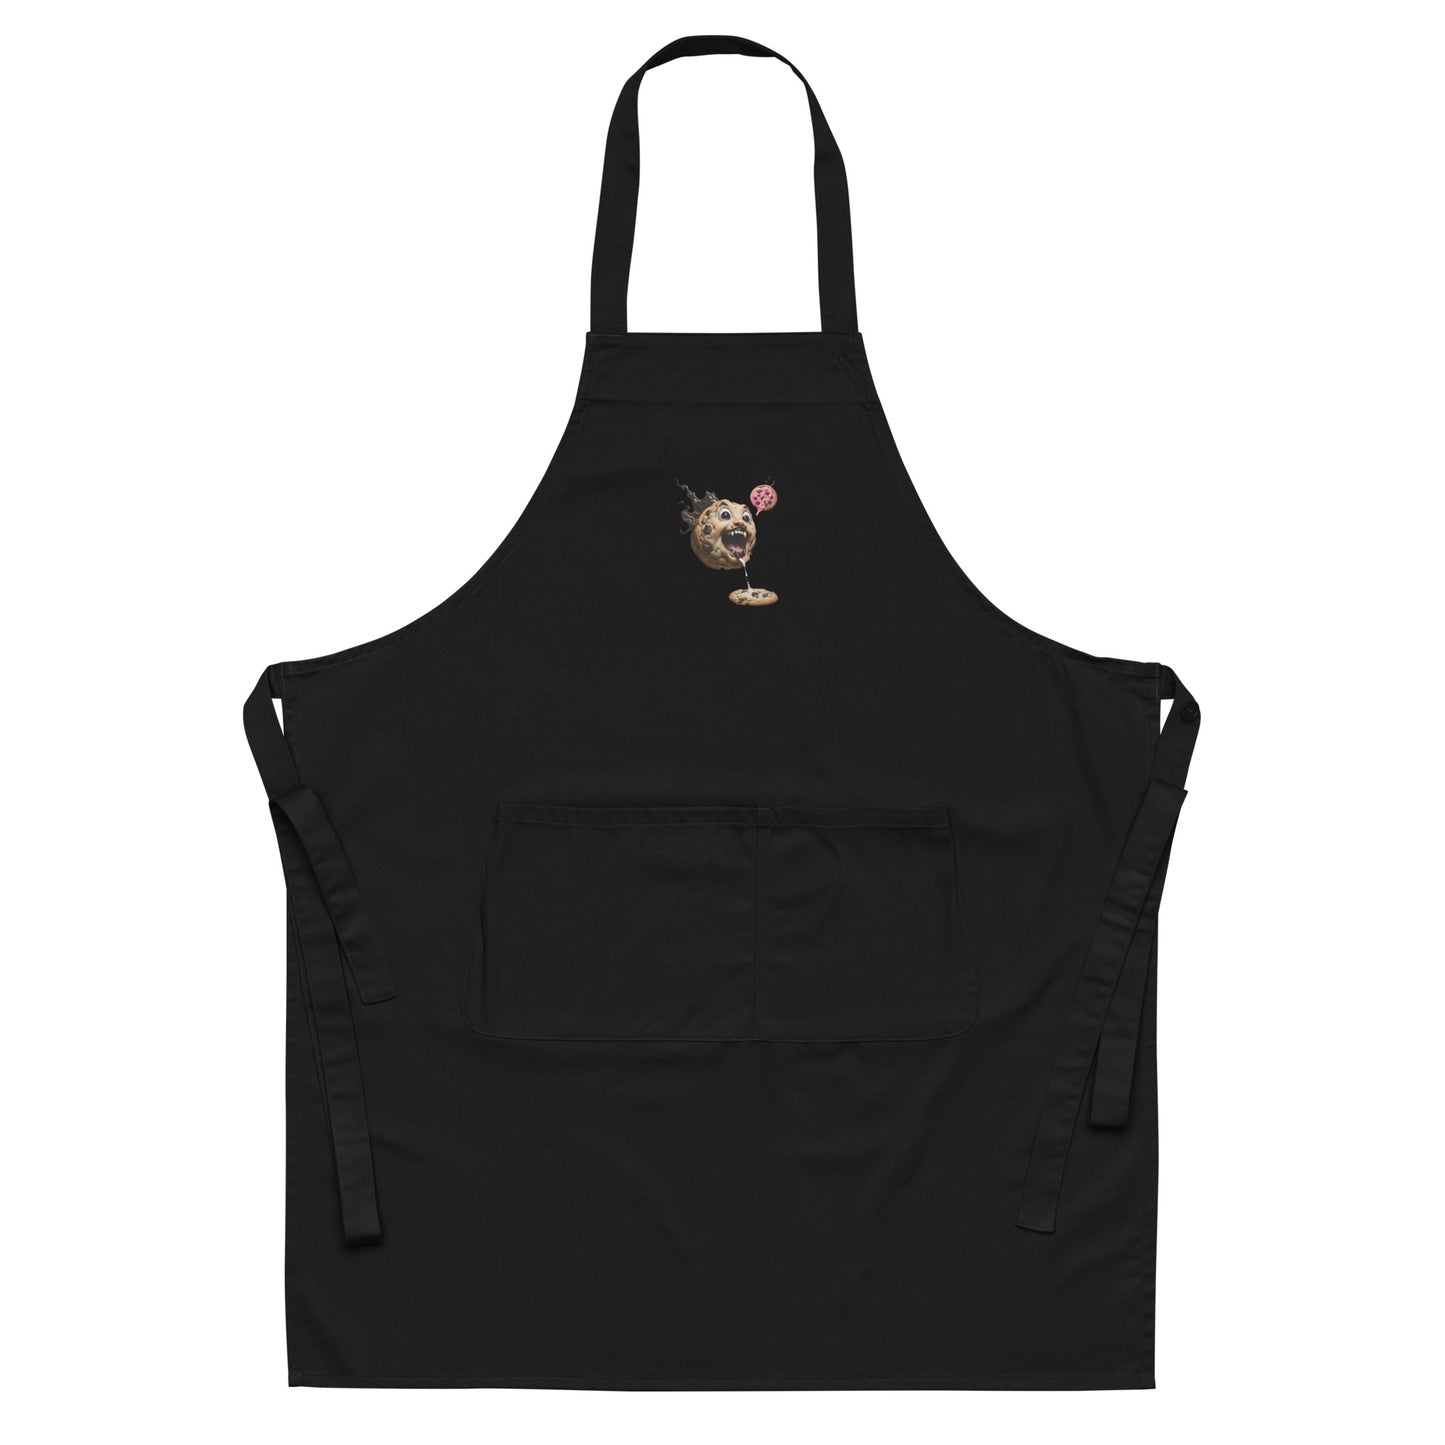 "Lost my Cookies" cotton apron